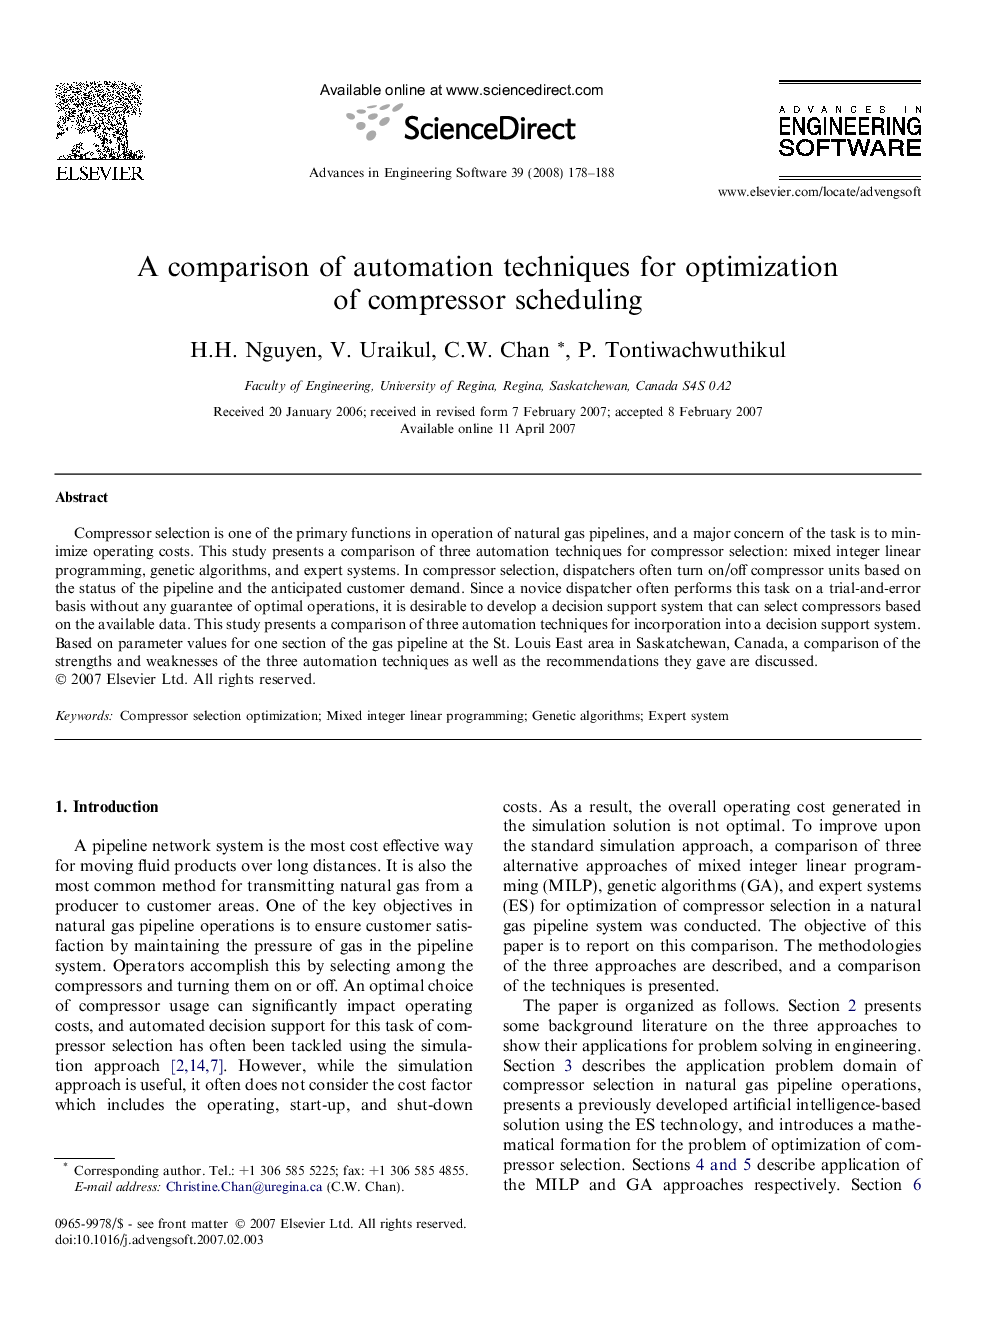 A comparison of automation techniques for optimization of compressor scheduling